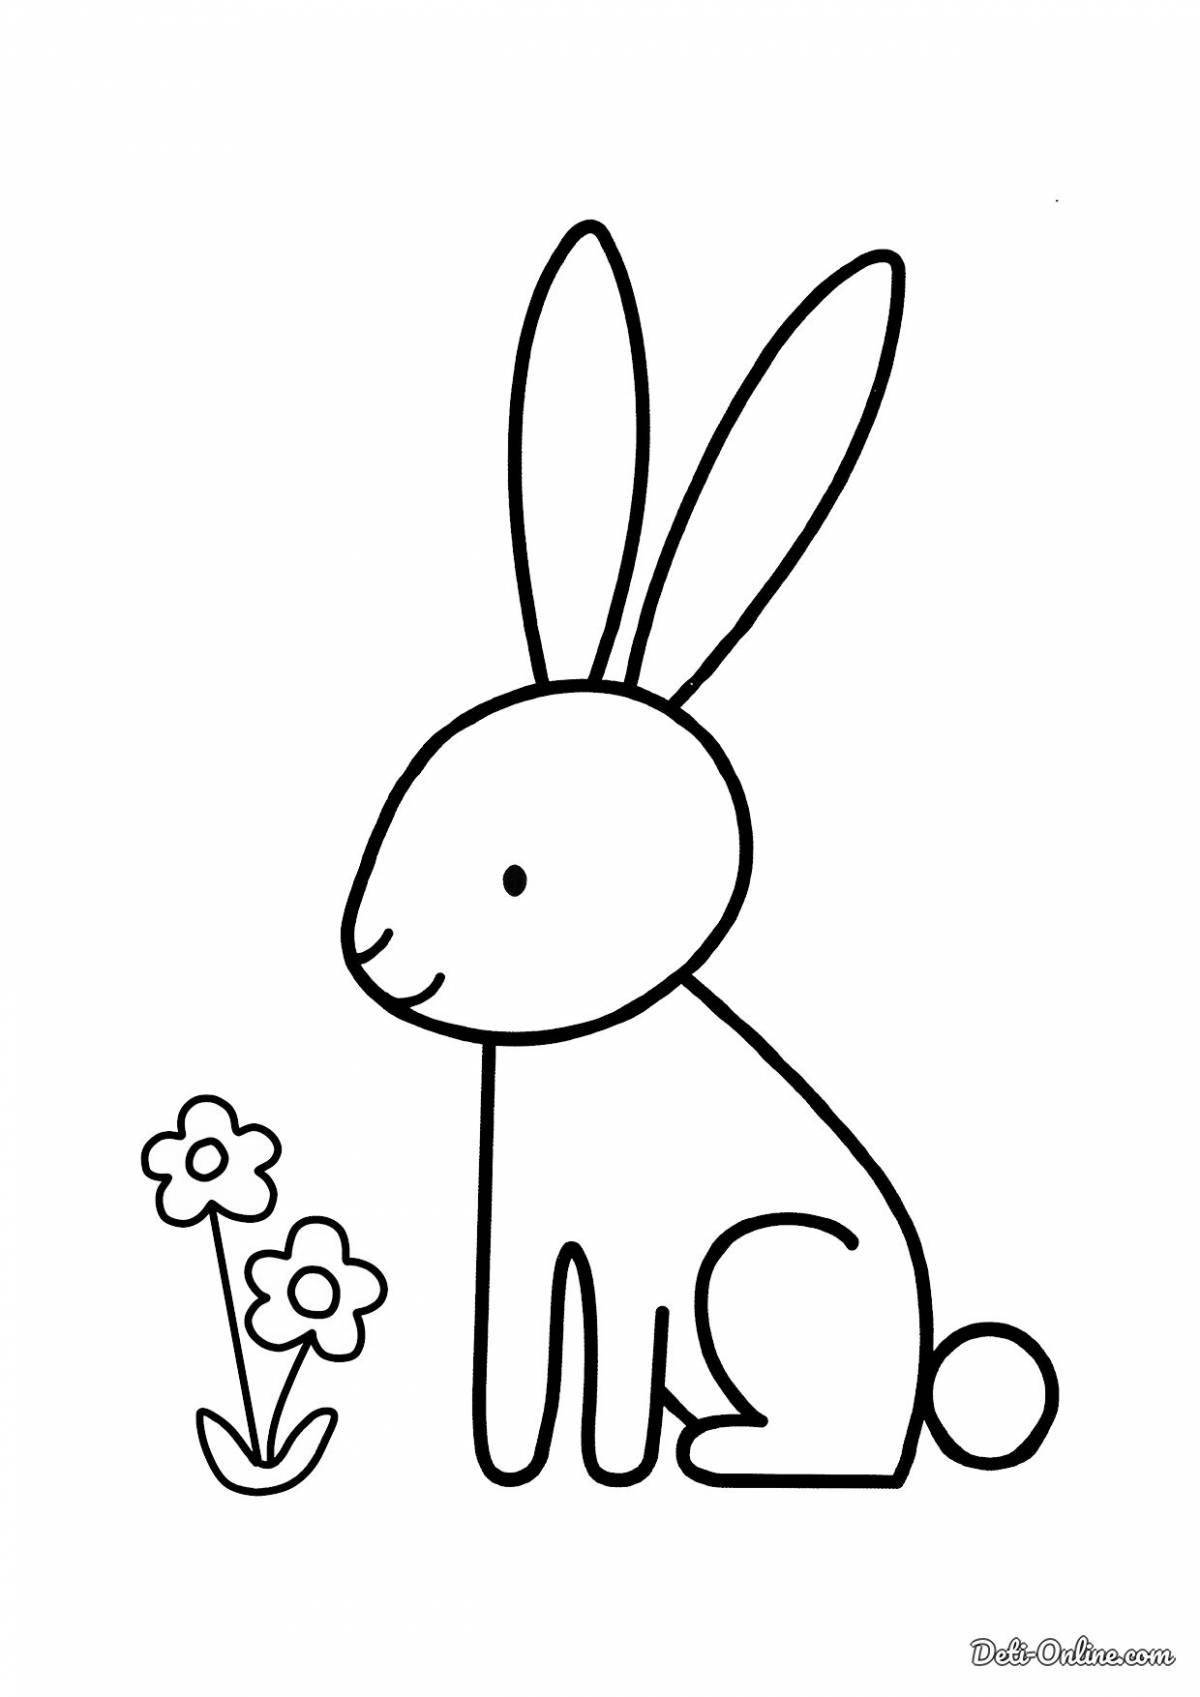 Coloring book cute hare for children 2-3 years old